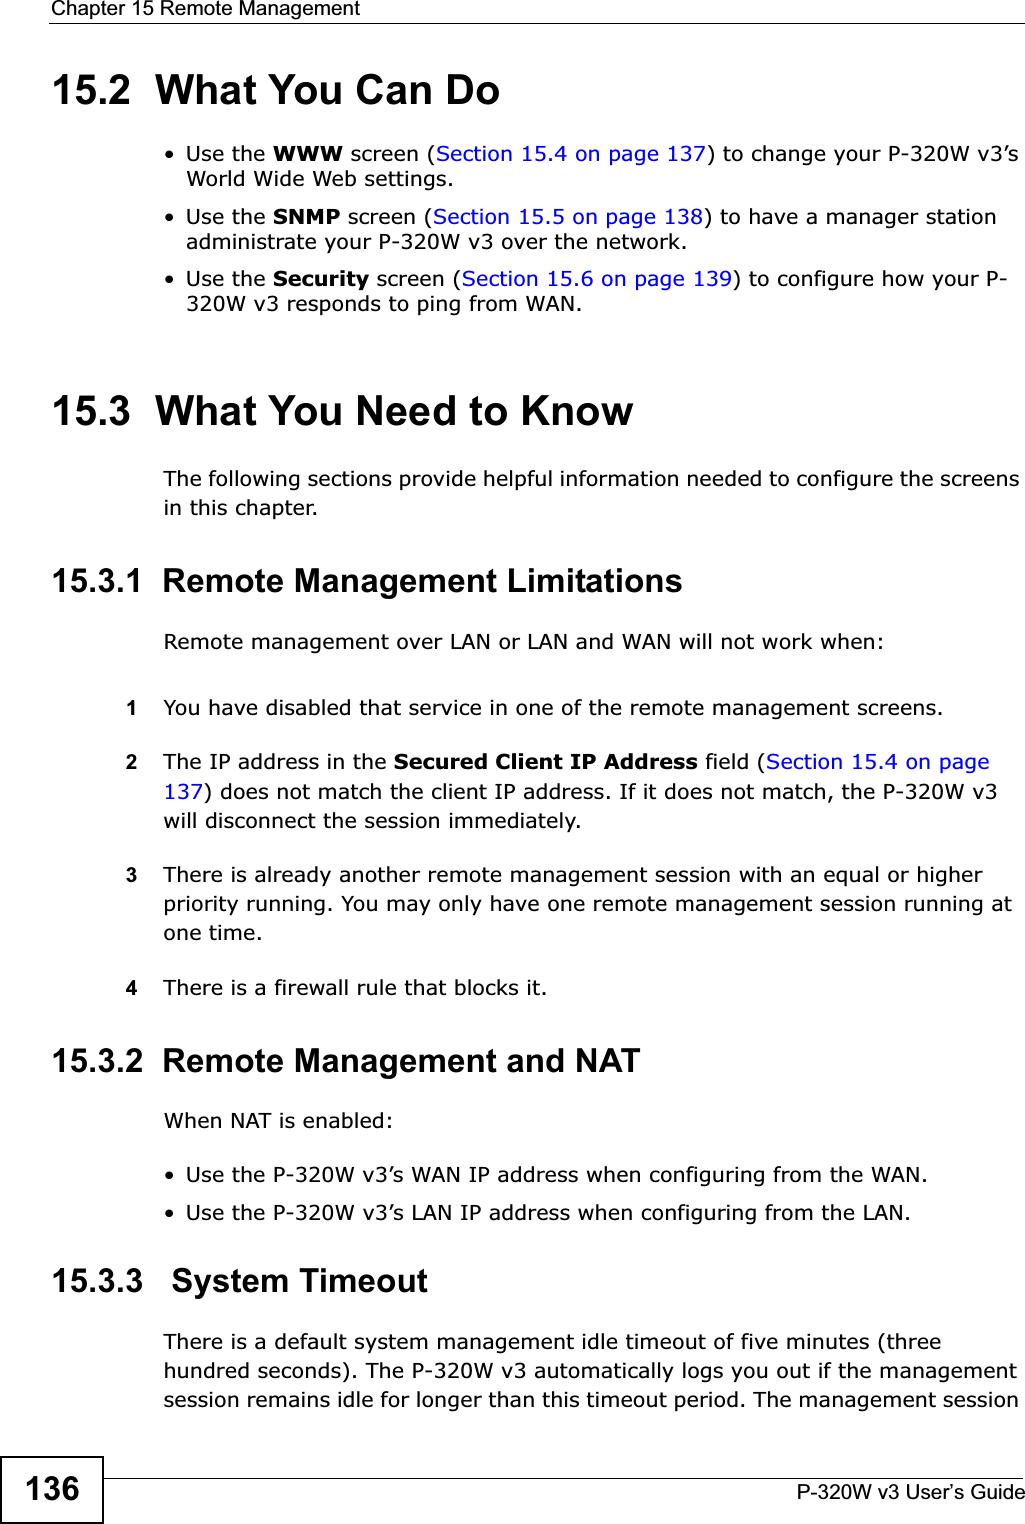 Chapter 15 Remote ManagementP-320W v3 User’s Guide13615.2  What You Can Do•Use the WWW screen (Section 15.4 on page 137) to change your P-320W v3’s World Wide Web settings.•Use the SNMP screen (Section 15.5 on page 138) to have a manager station administrate your P-320W v3 over the network.•Use the Security screen (Section 15.6 on page 139) to configure how your P-320W v3 responds to ping from WAN.15.3  What You Need to KnowThe following sections provide helpful information needed to configure the screens in this chapter.15.3.1  Remote Management LimitationsRemote management over LAN or LAN and WAN will not work when:1You have disabled that service in one of the remote management screens.2The IP address in the Secured Client IP Address field (Section 15.4 on page 137) does not match the client IP address. If it does not match, the P-320W v3 will disconnect the session immediately.3There is already another remote management session with an equal or higher priority running. You may only have one remote management session running at one time.4There is a firewall rule that blocks it.15.3.2  Remote Management and NATWhen NAT is enabled:• Use the P-320W v3’s WAN IP address when configuring from the WAN. • Use the P-320W v3’s LAN IP address when configuring from the LAN.15.3.3   System TimeoutThere is a default system management idle timeout of five minutes (three hundred seconds). The P-320W v3 automatically logs you out if the management session remains idle for longer than this timeout period. The management session 